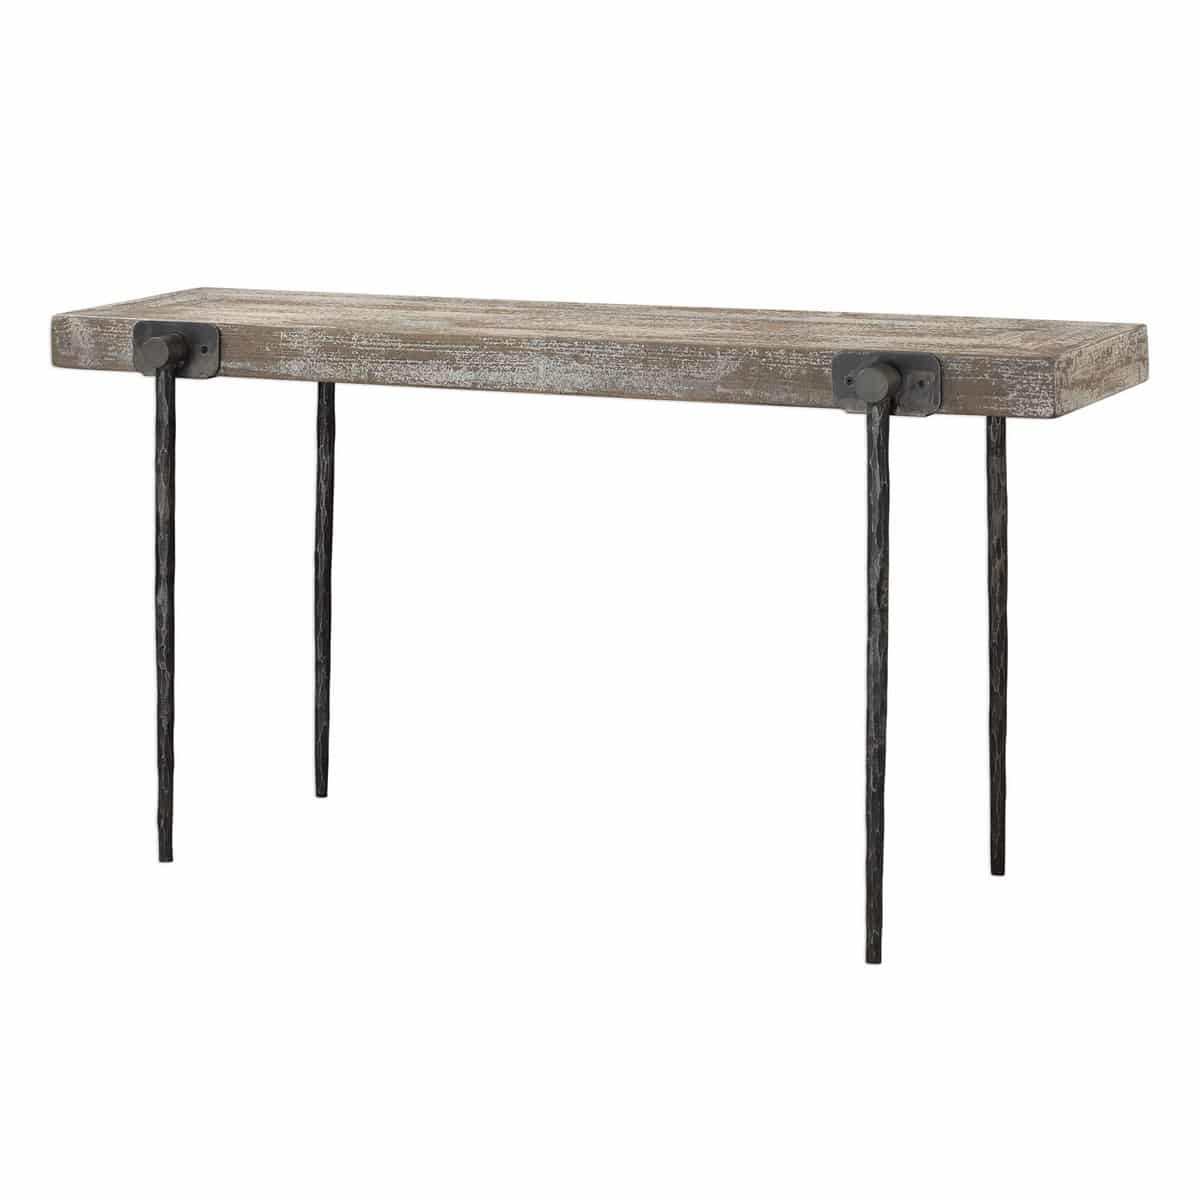 Rustic industrial styling displayed in the tapered cast iron legs featuring a hand chiseled texture. Accented by four oversize iron knobs holding a recycled pine tabletop finished in a sandblasted antique white over natural wood. Solid wood will continue to move with temperature and humidity changes, which can result in small cracks and uneven surfaces, adding to its authenticity and character. Dimensions: 62 W X 32 H X 18 D (in) Weight: 66